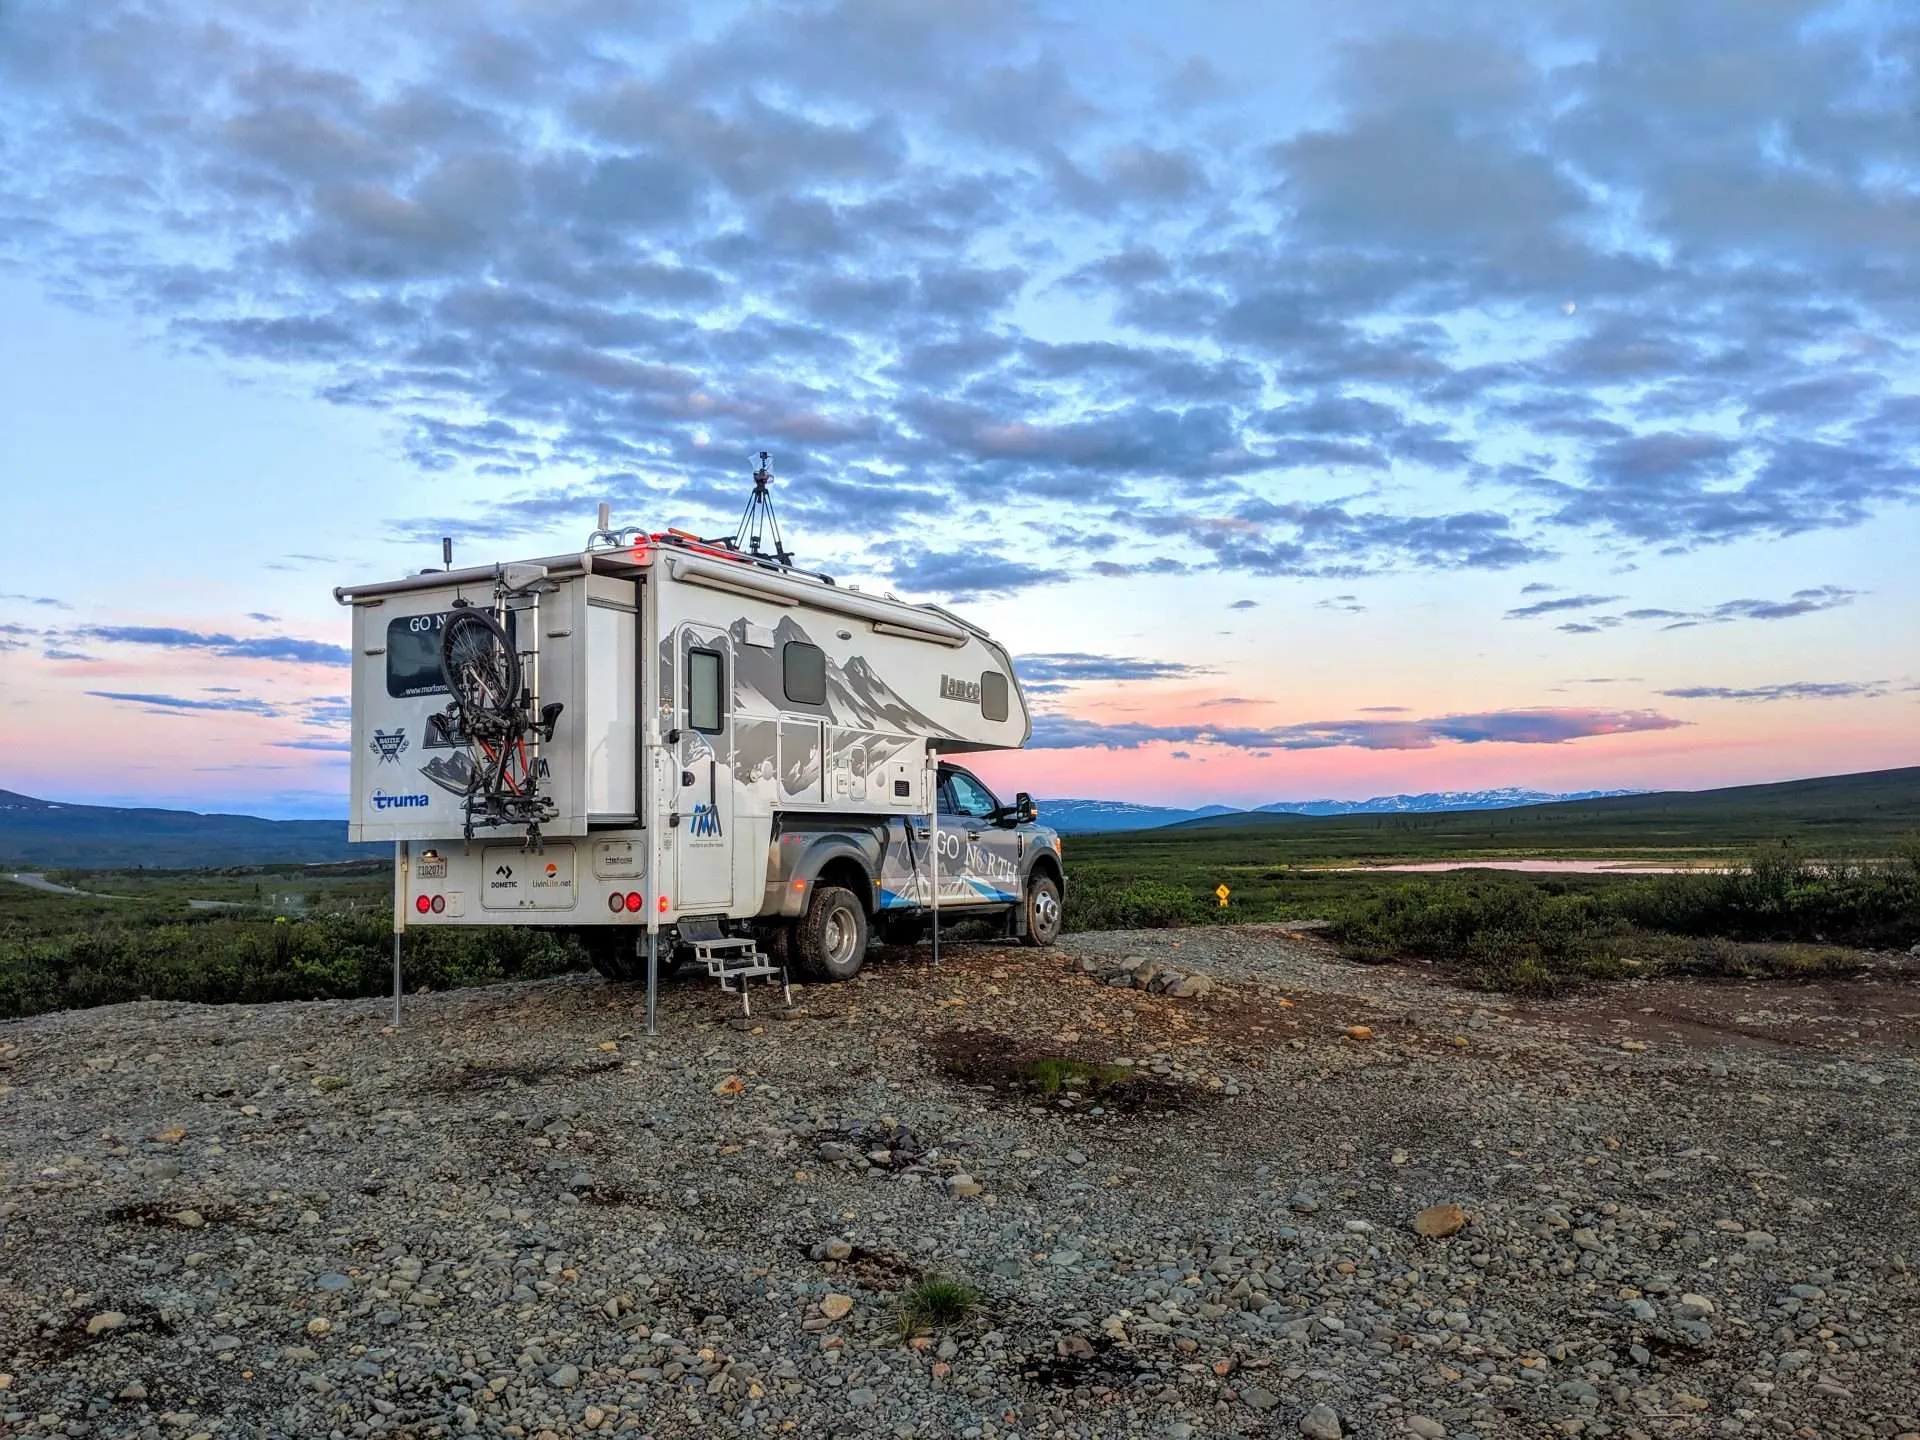 Rig at sunset campsite